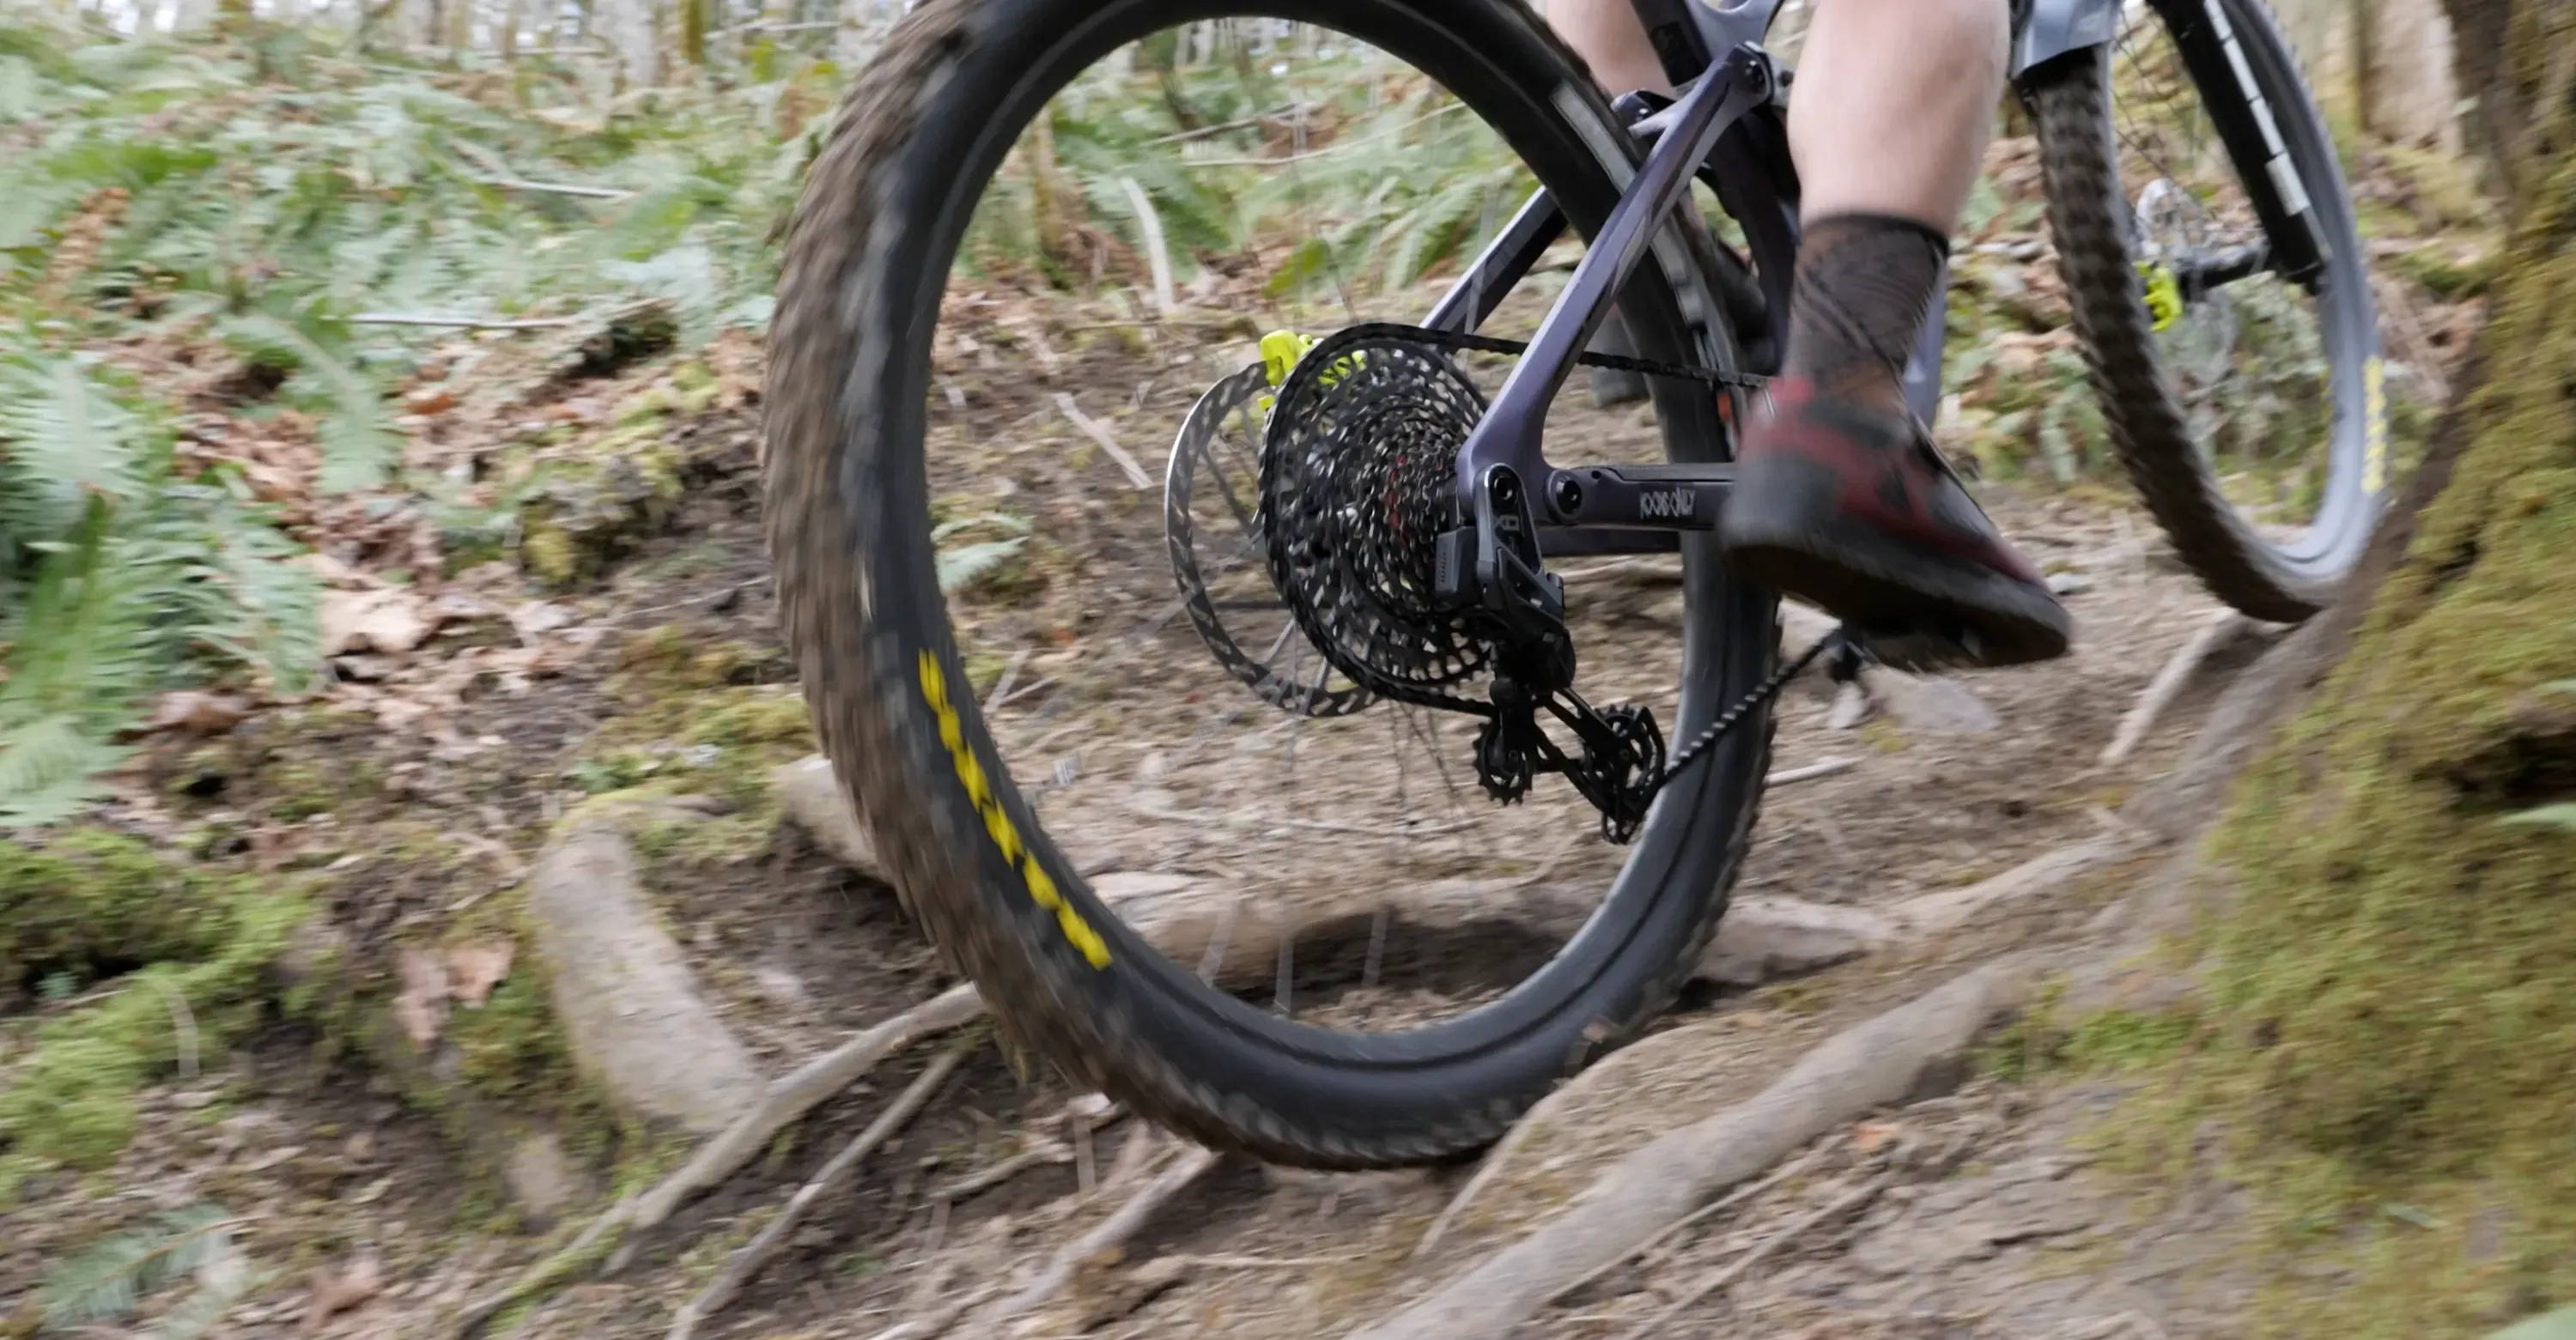 pedaling a sram x0 eagle axs t-type transmission over some roots